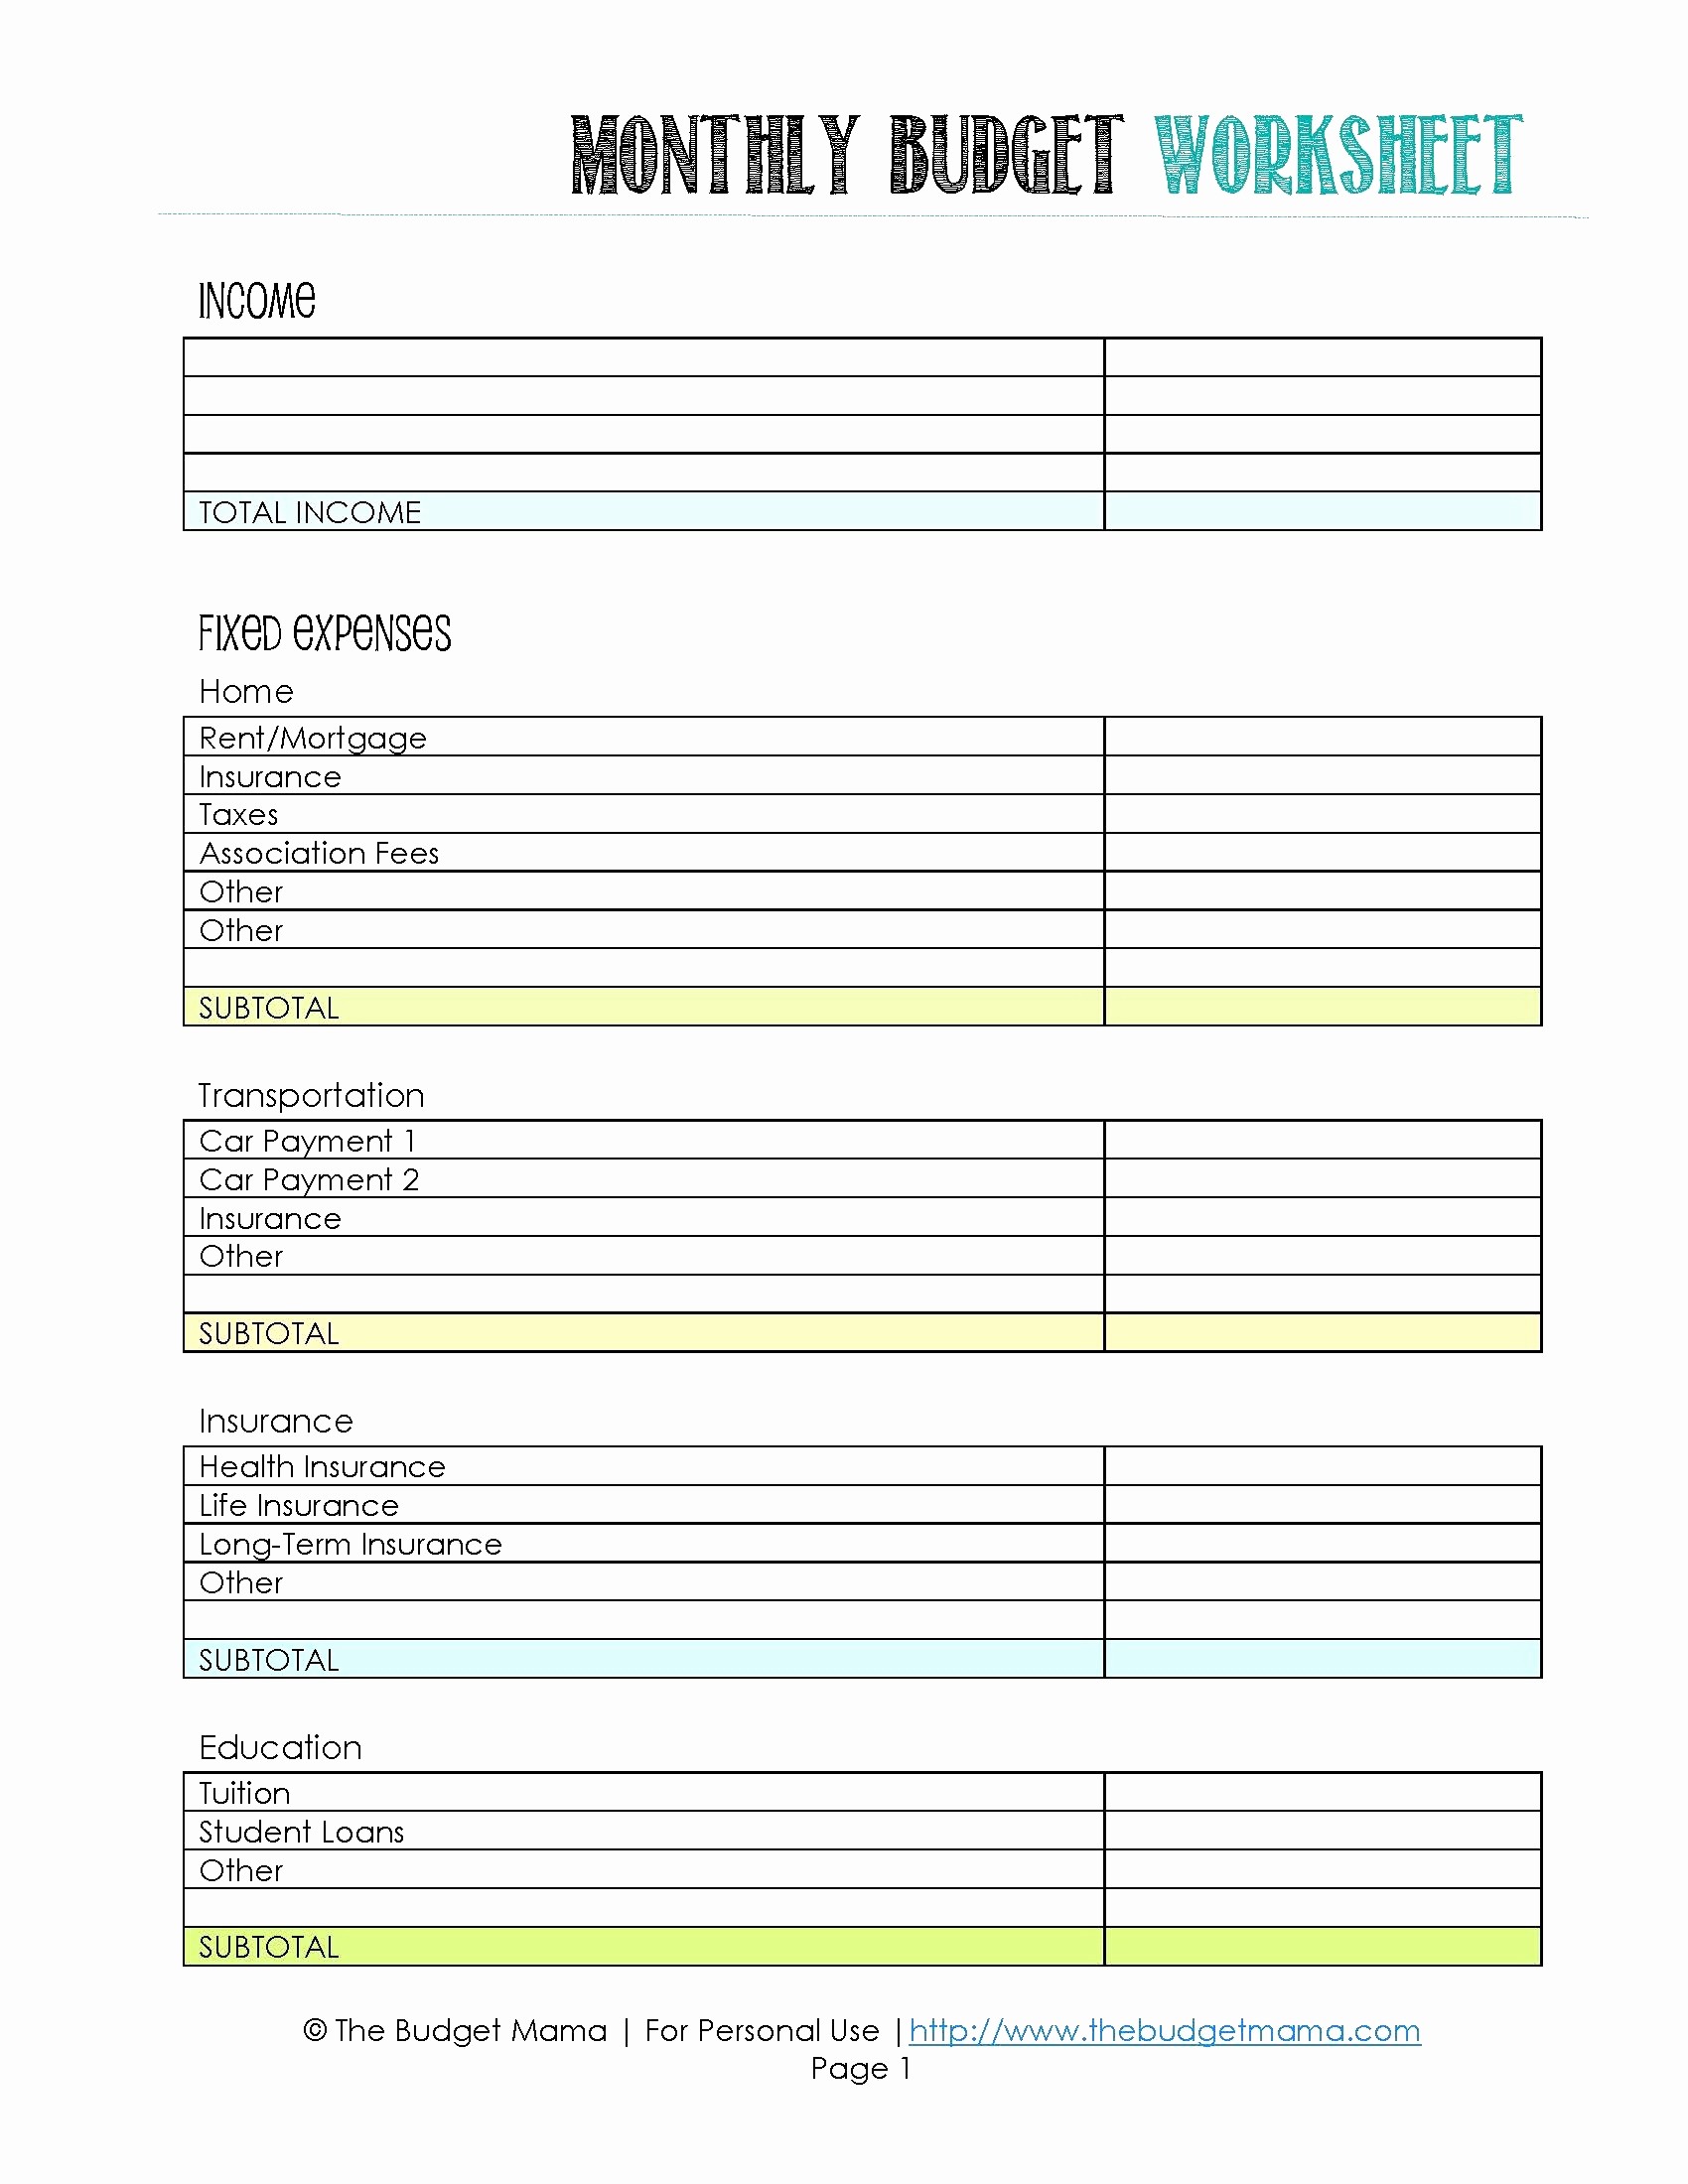 Donation Value Guide 2015 Spreadsheet Lovely Valuation Donated Document 2016